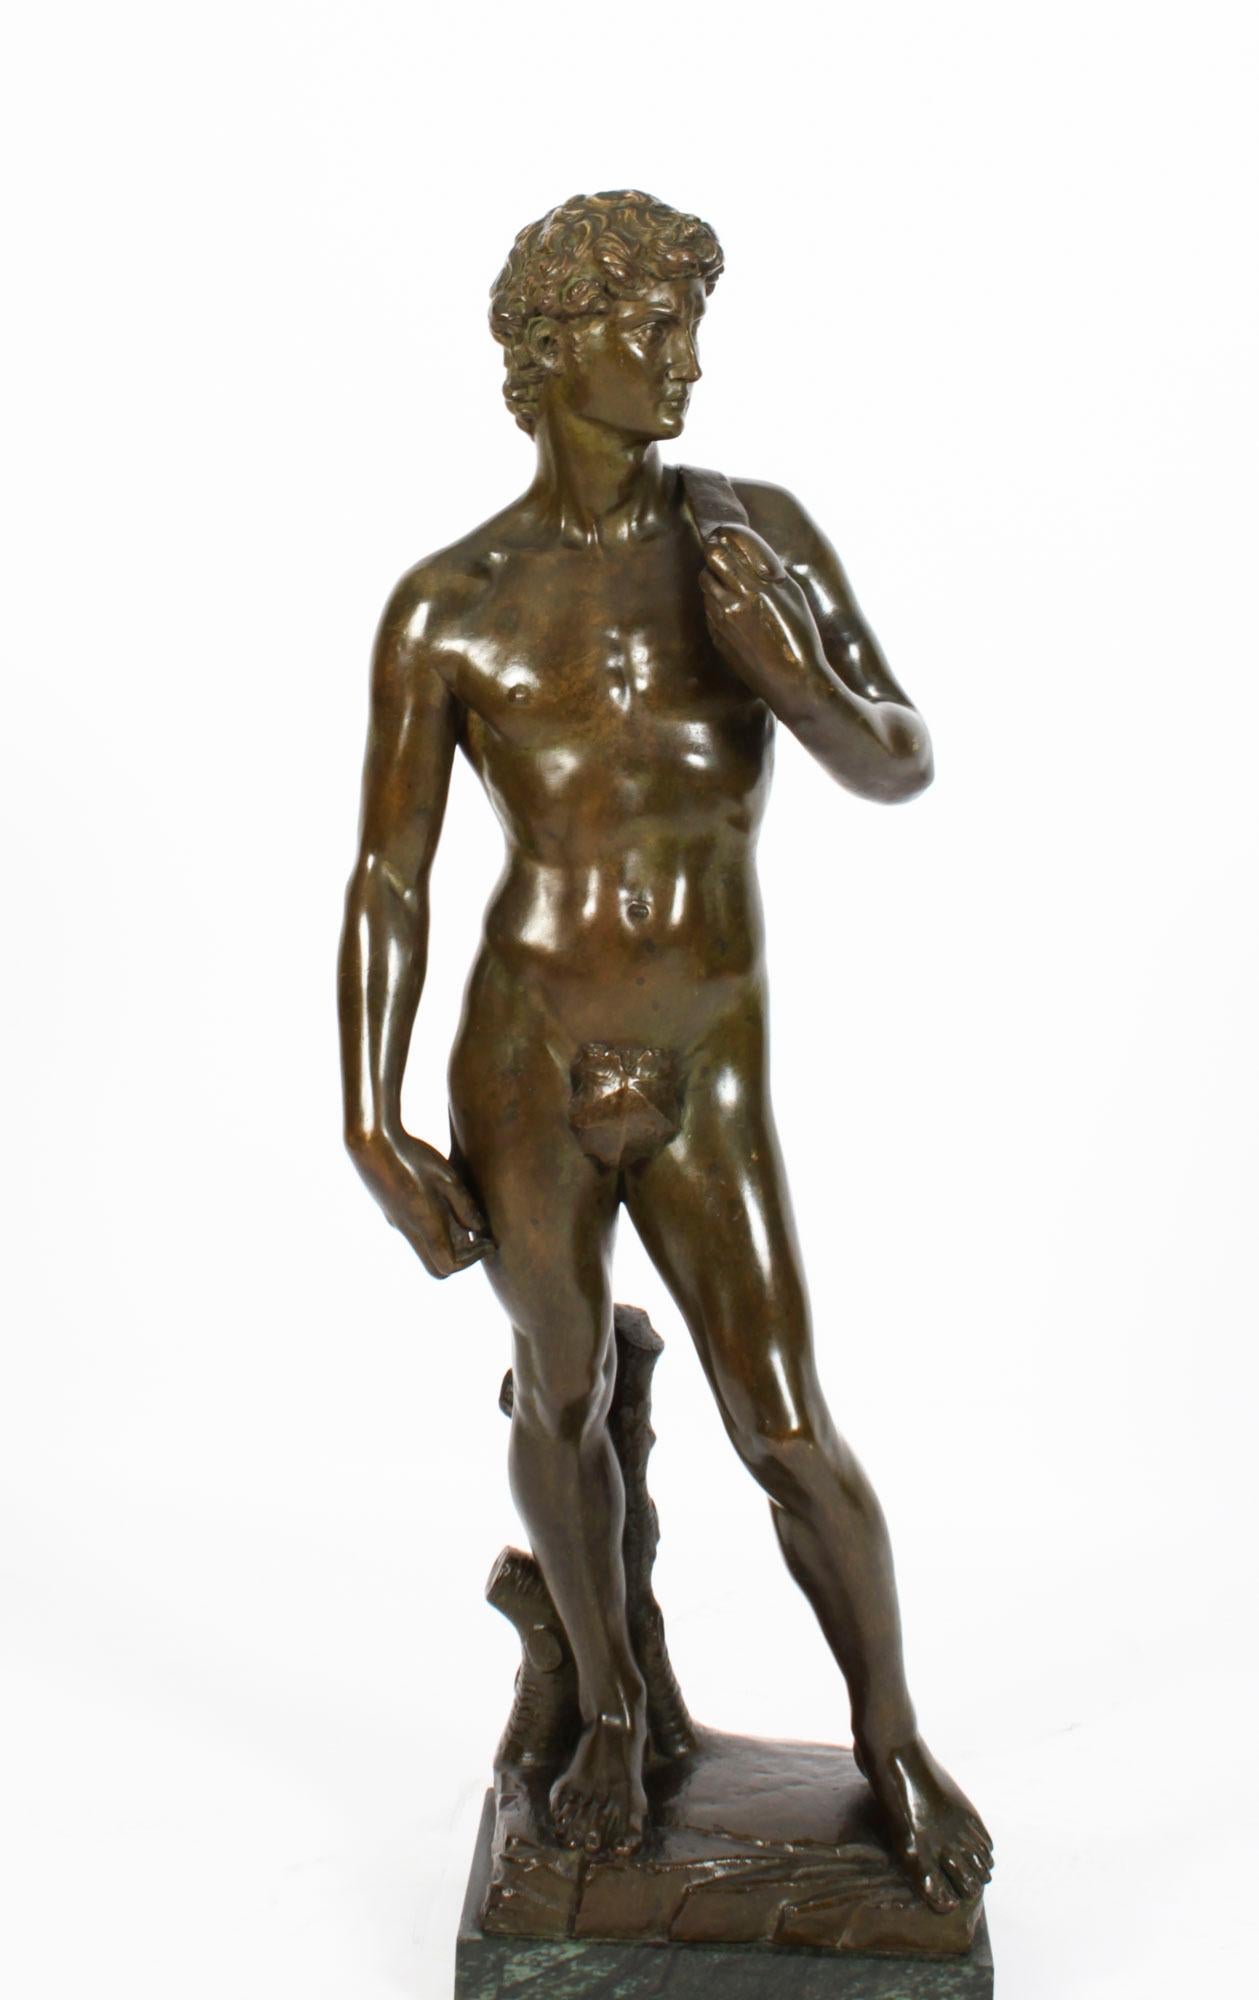 This is an elegant monumental Grand Tour bronze sculpture of Michelangelo's David, circa 1880 in date.

The full-length portrait statue is of David, the 14ft marble statue depicts the Biblical hero David, represented as a standing male nude, David